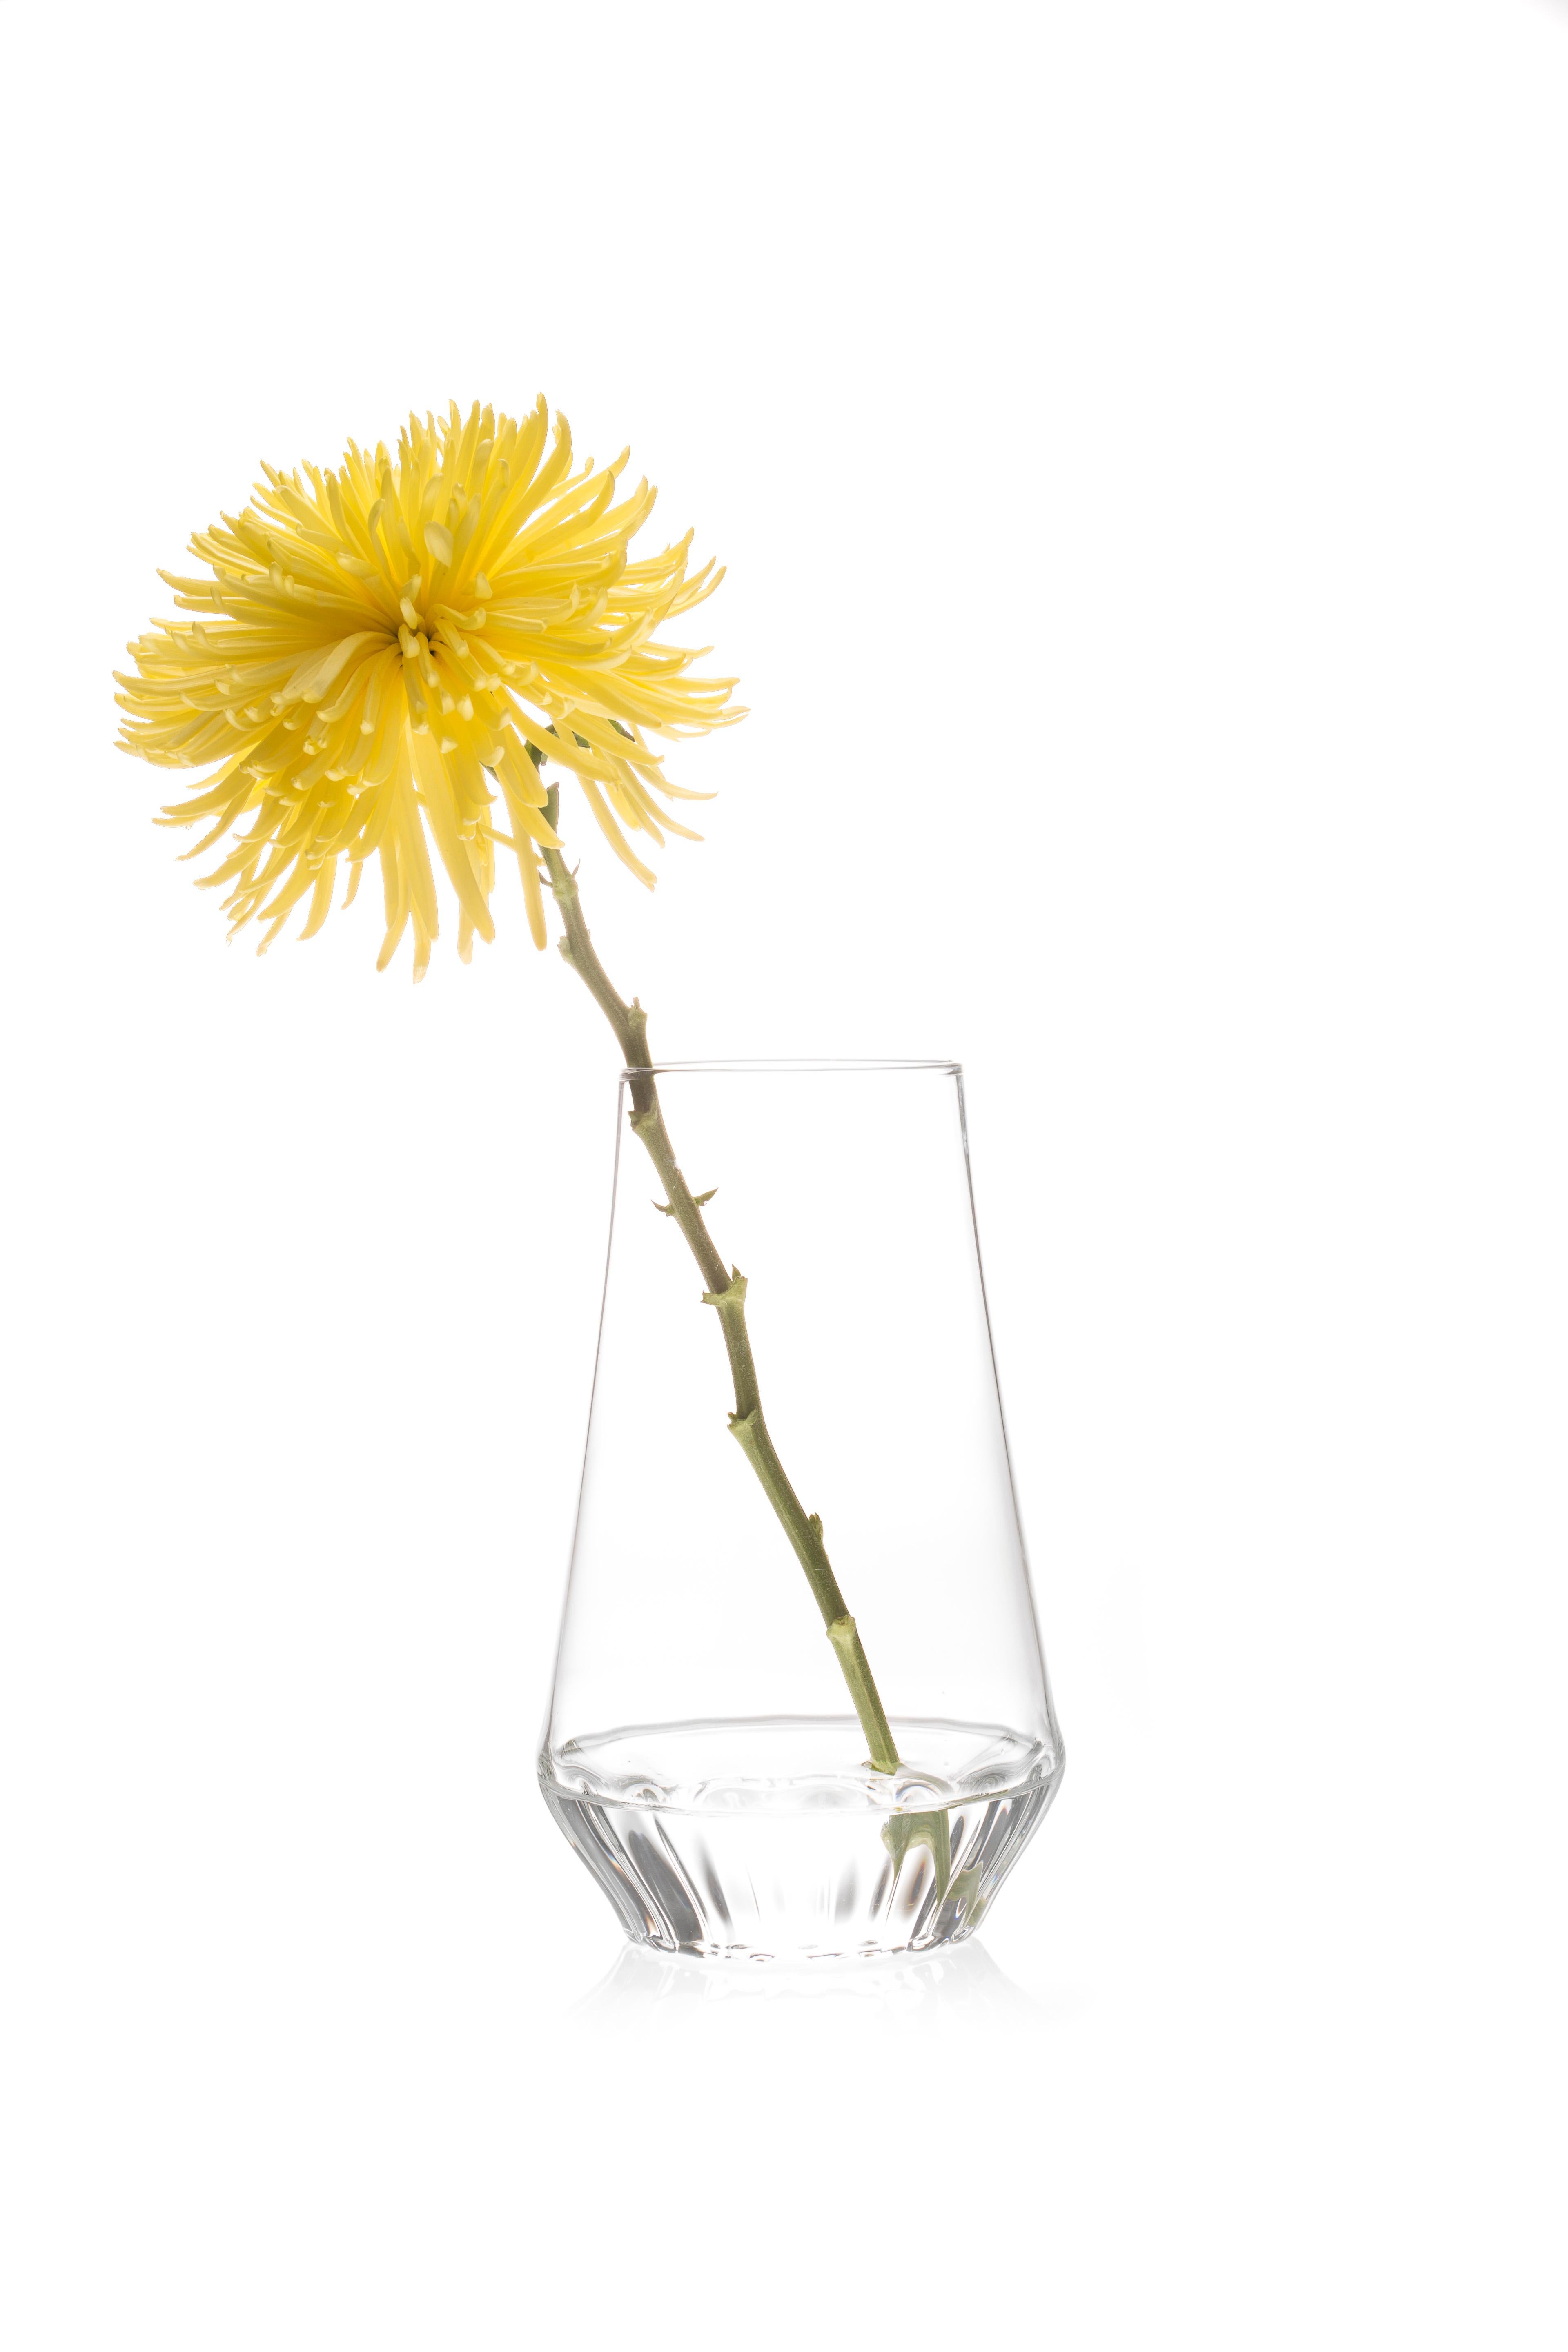 The Contemporary Czech clear glass Rossi medium vase, from a single stem to a beautiful bouquet, the modern and minimal Rossi vases highlight any flower arrangement they contain by masking the stems at the bottom of the vase. For everyday use or